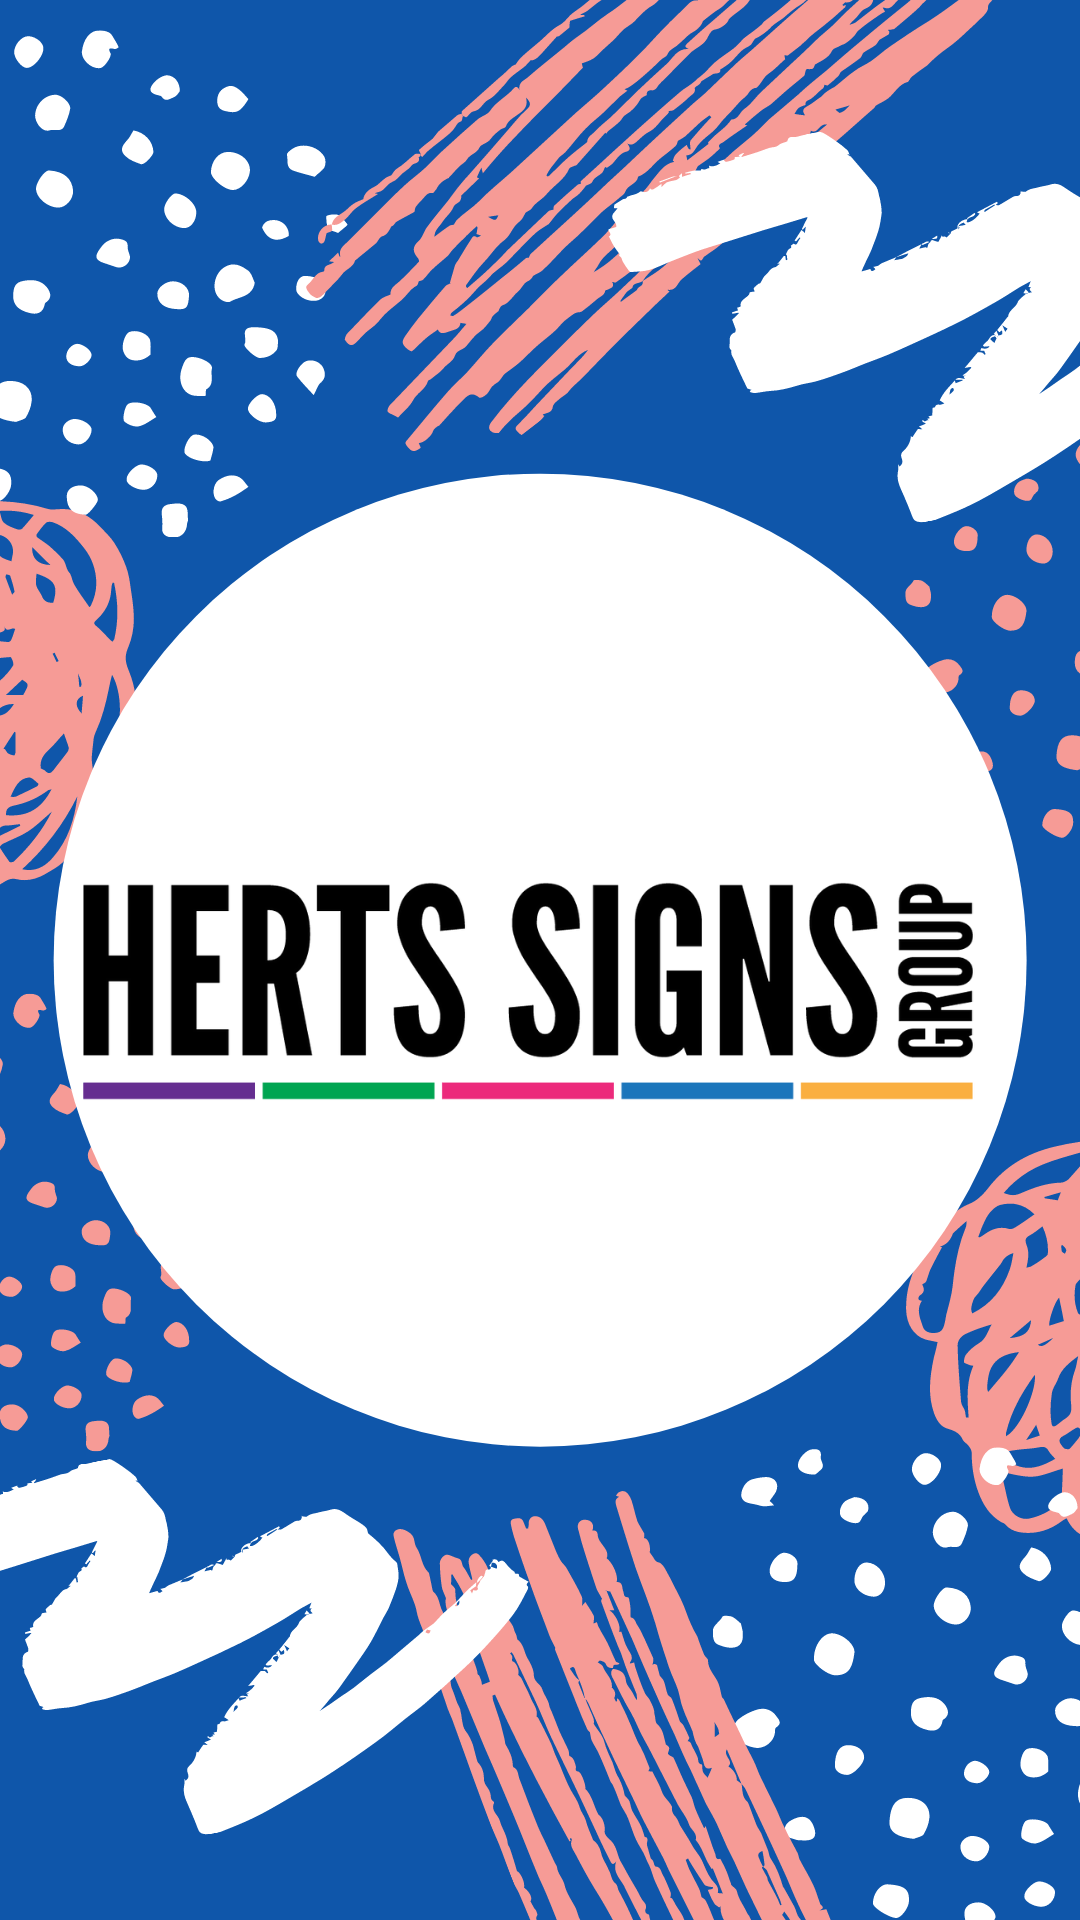 Main image for Herts Signs & Graphics Ltd